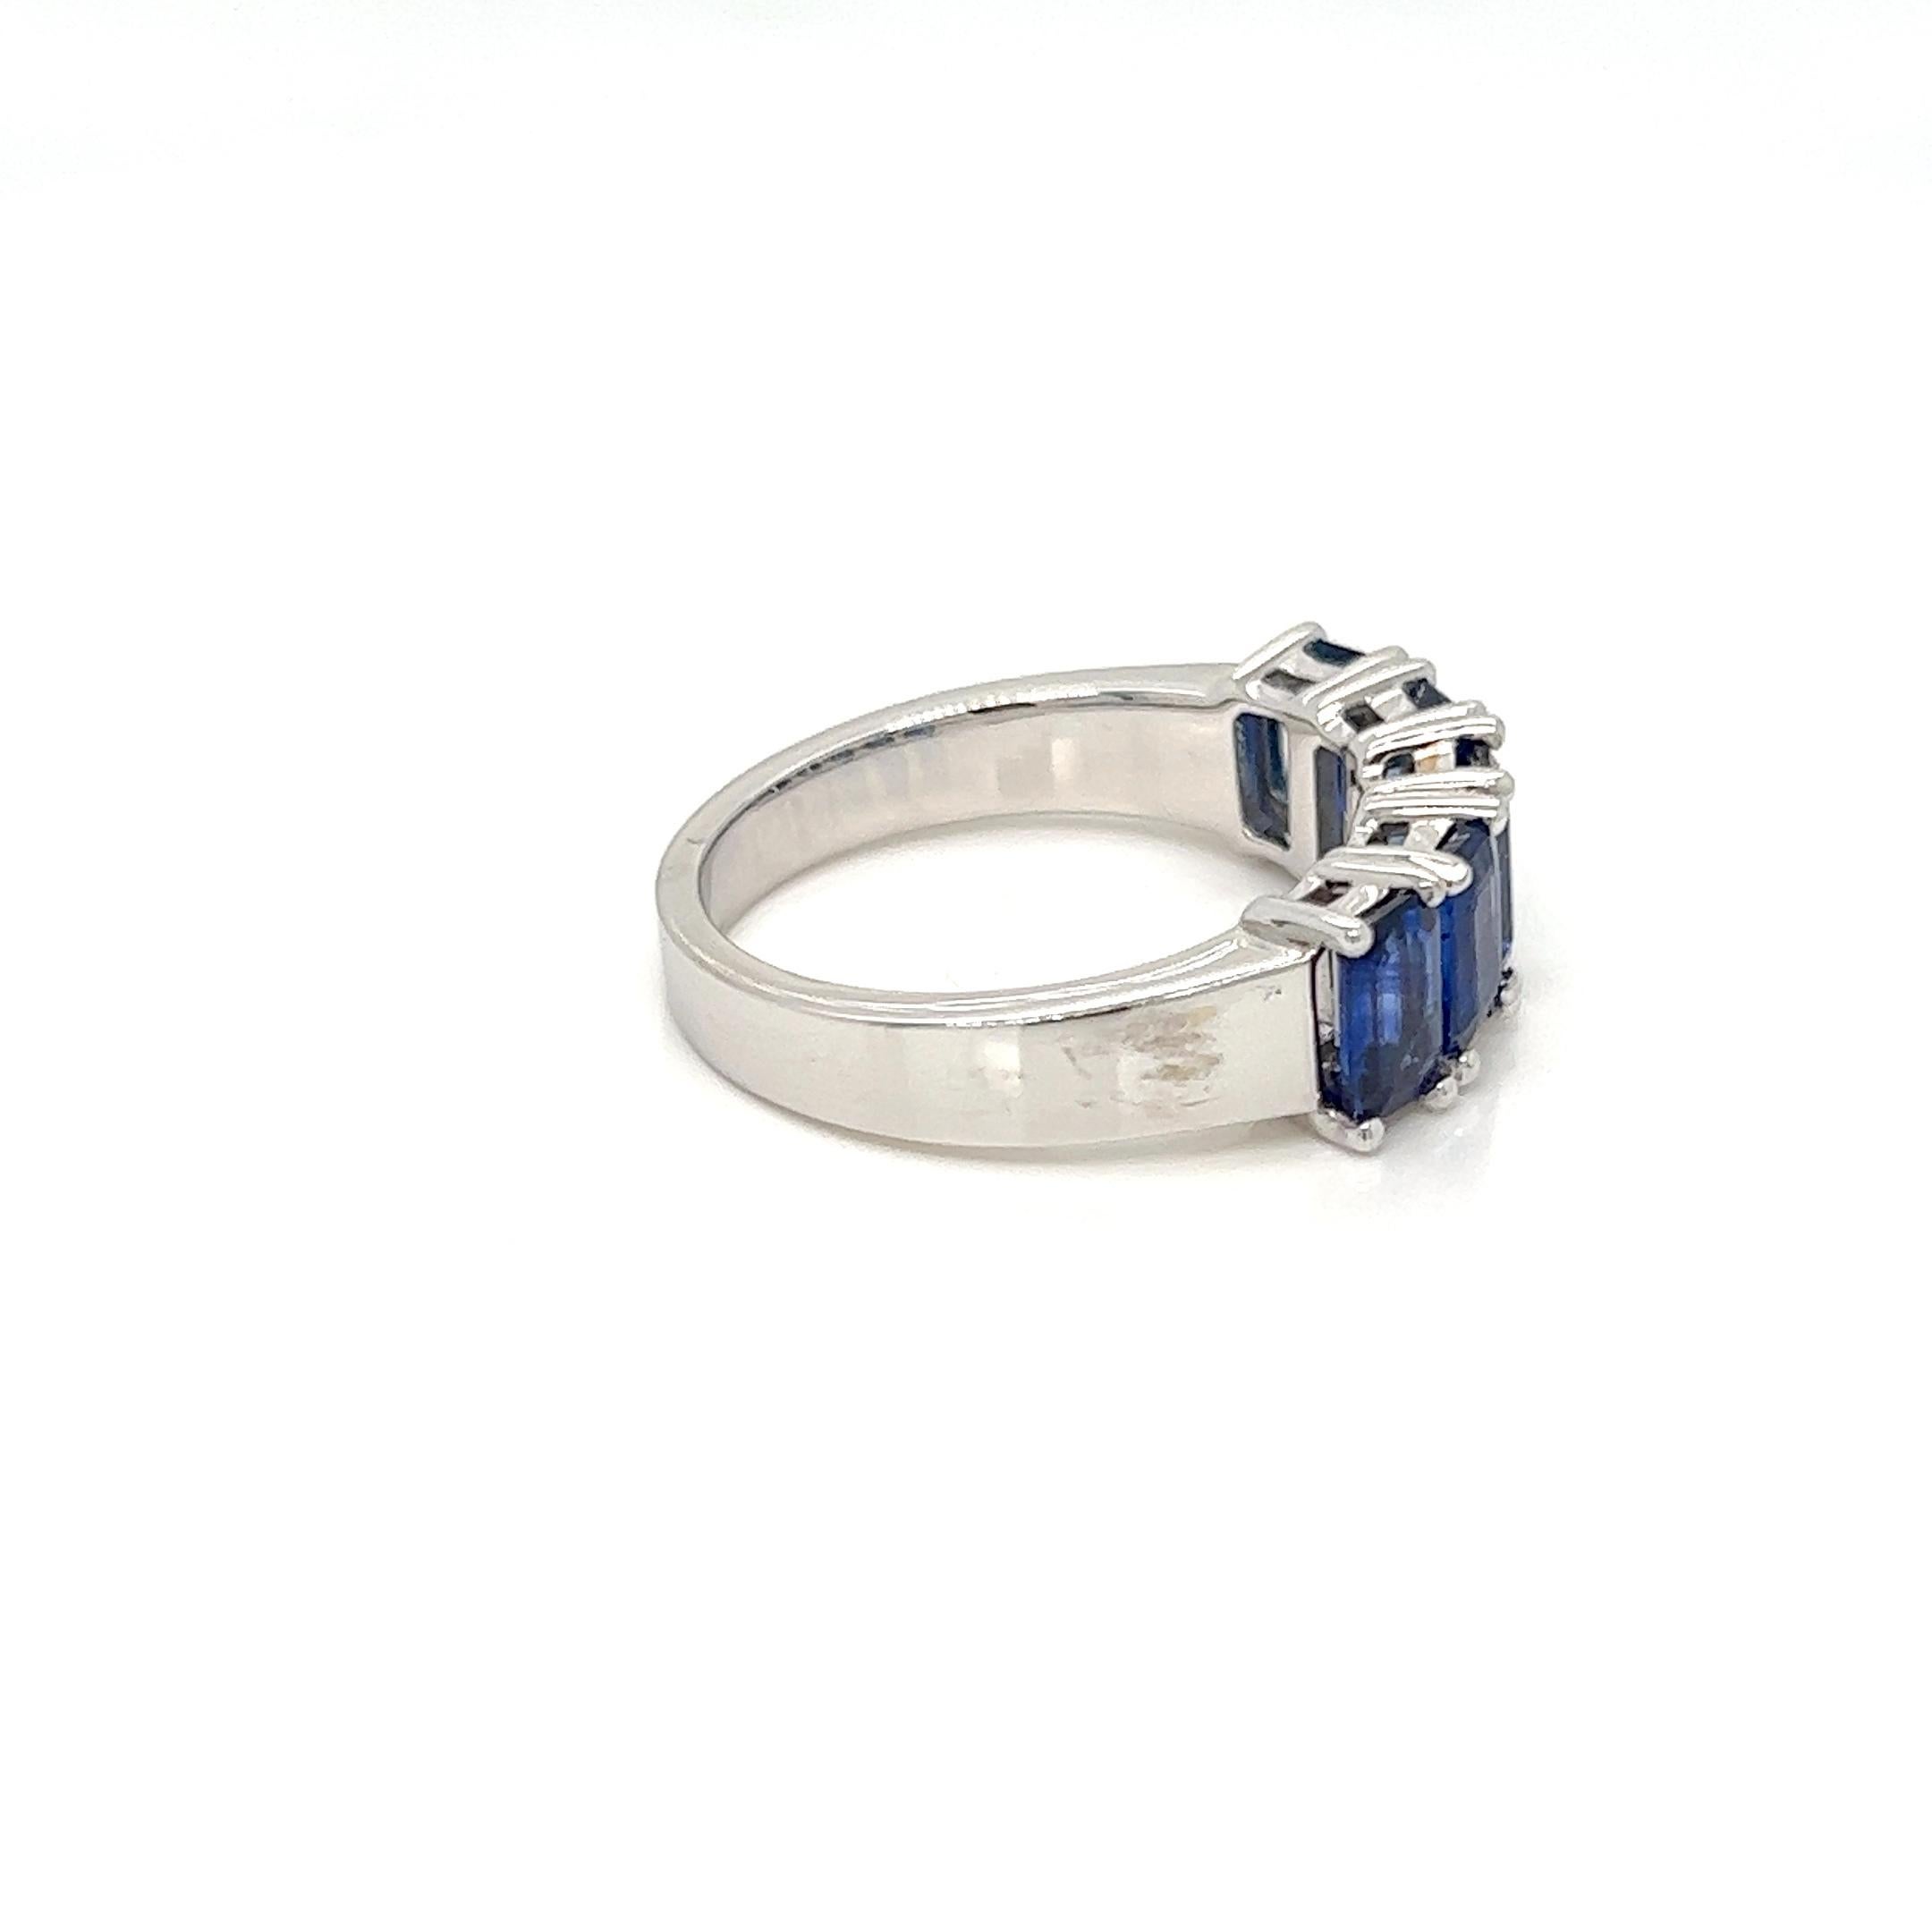 For Sale:  2.89 Carats Sapphire Emerald Cut Eternity Ring in 18K White Gold 5